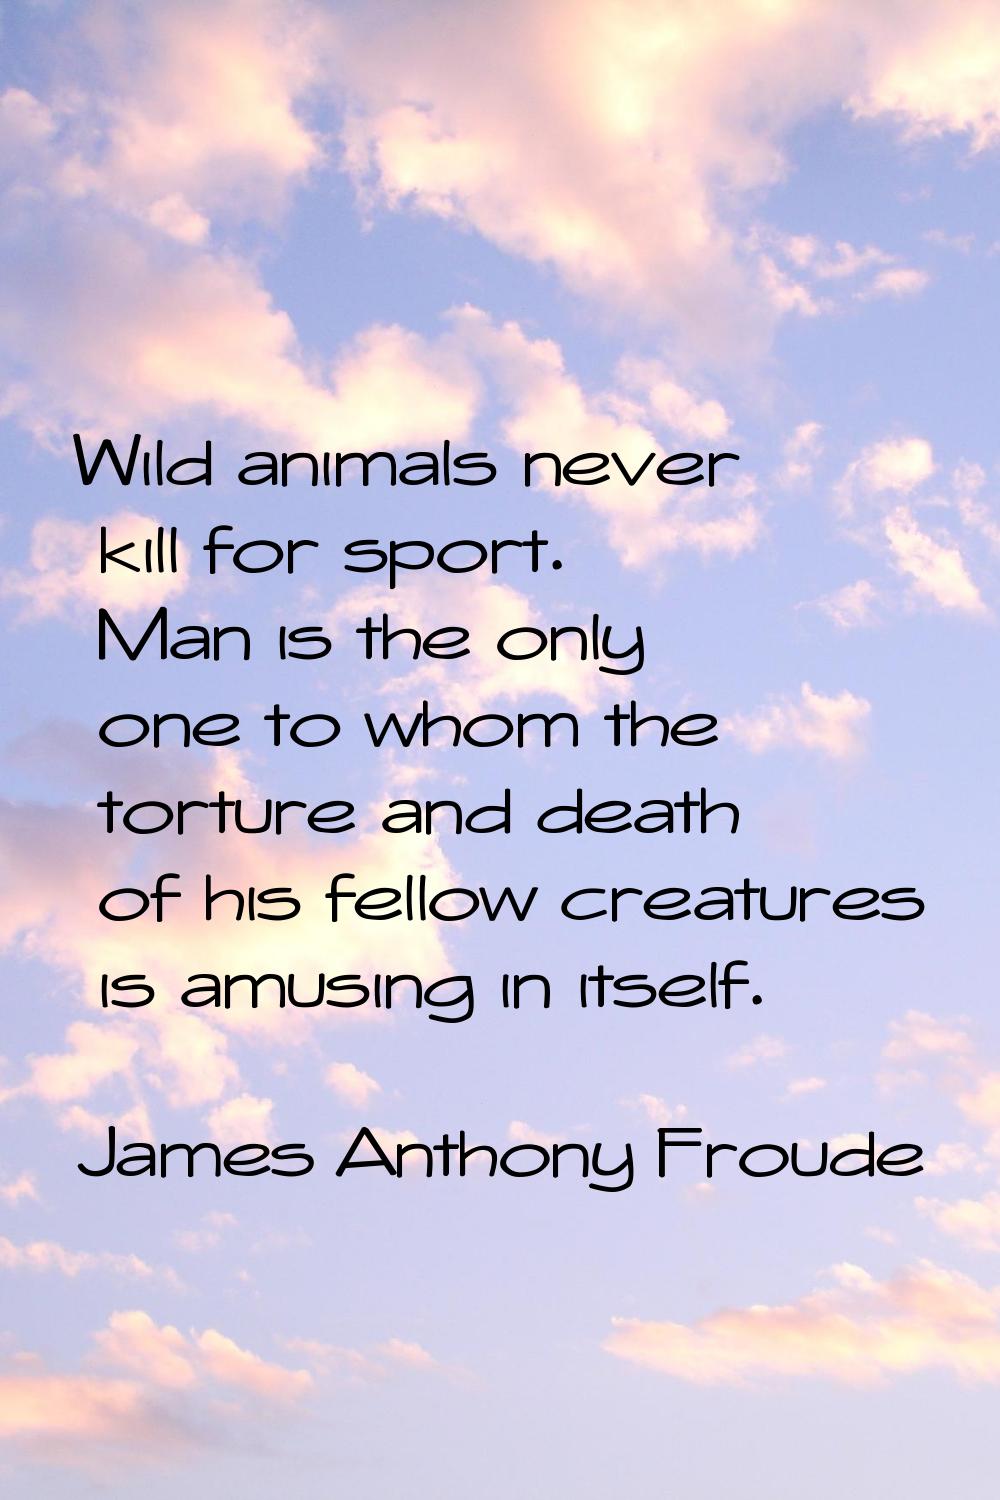 Wild animals never kill for sport. Man is the only one to whom the torture and death of his fellow 